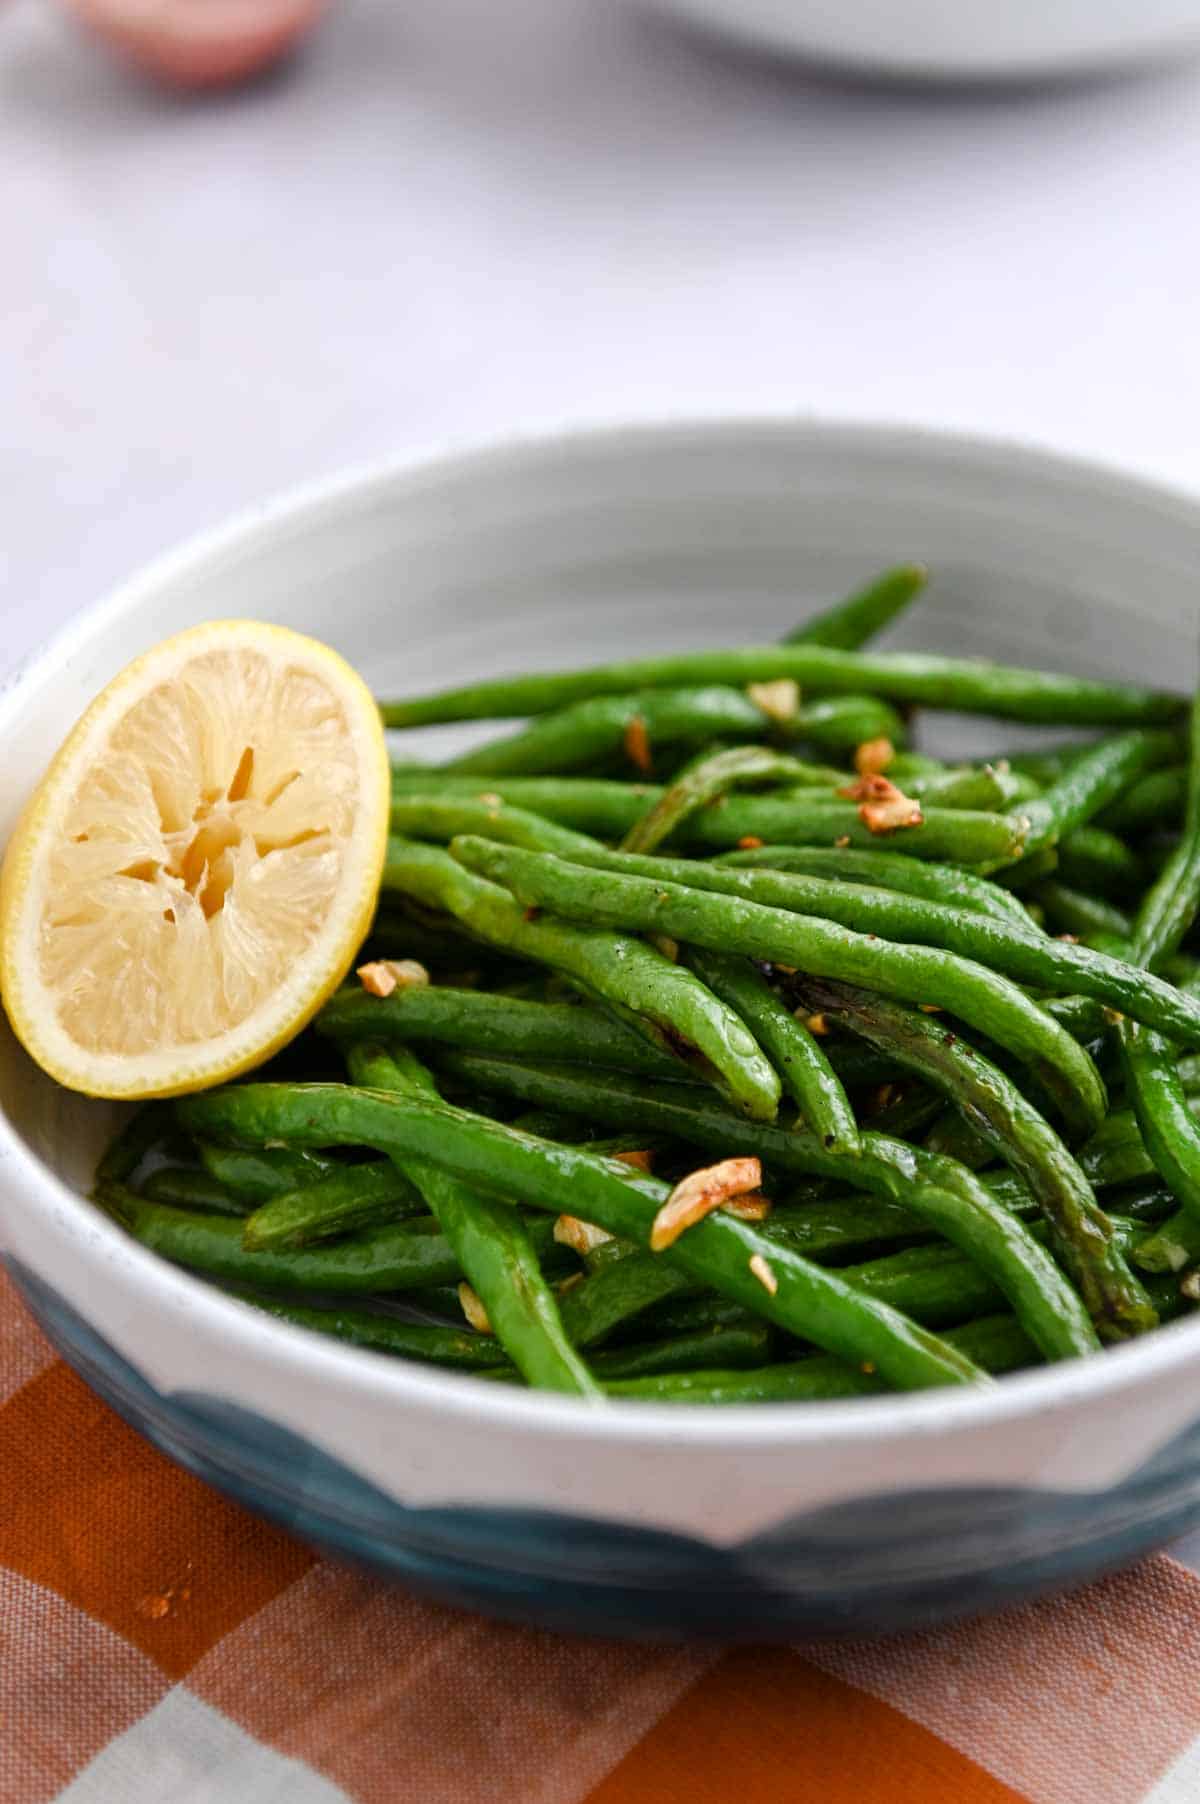 Bowl of green beans with roasted garlic and half a lemon resting on the green beans.